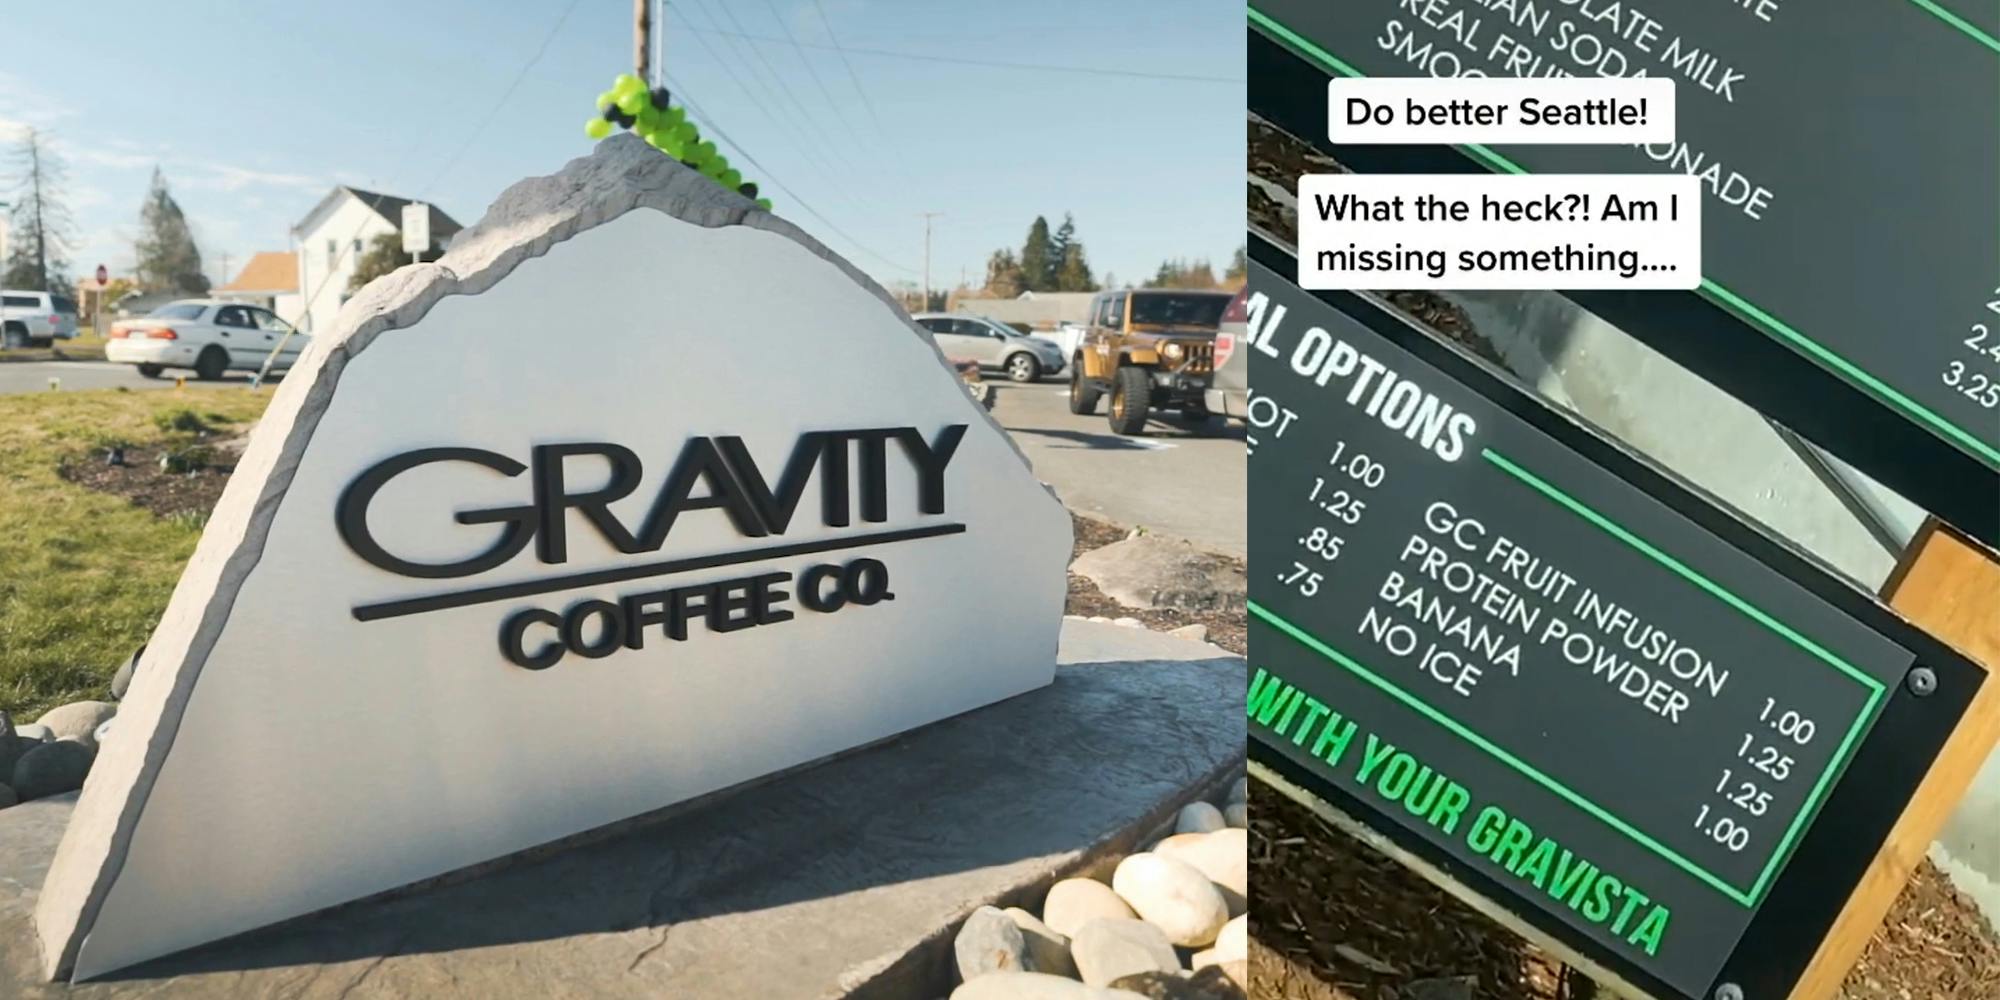 gravity coffee co sign (l) drive thru menu with caption "do better Seattle! What the heck?! Am I missing something...." (r)